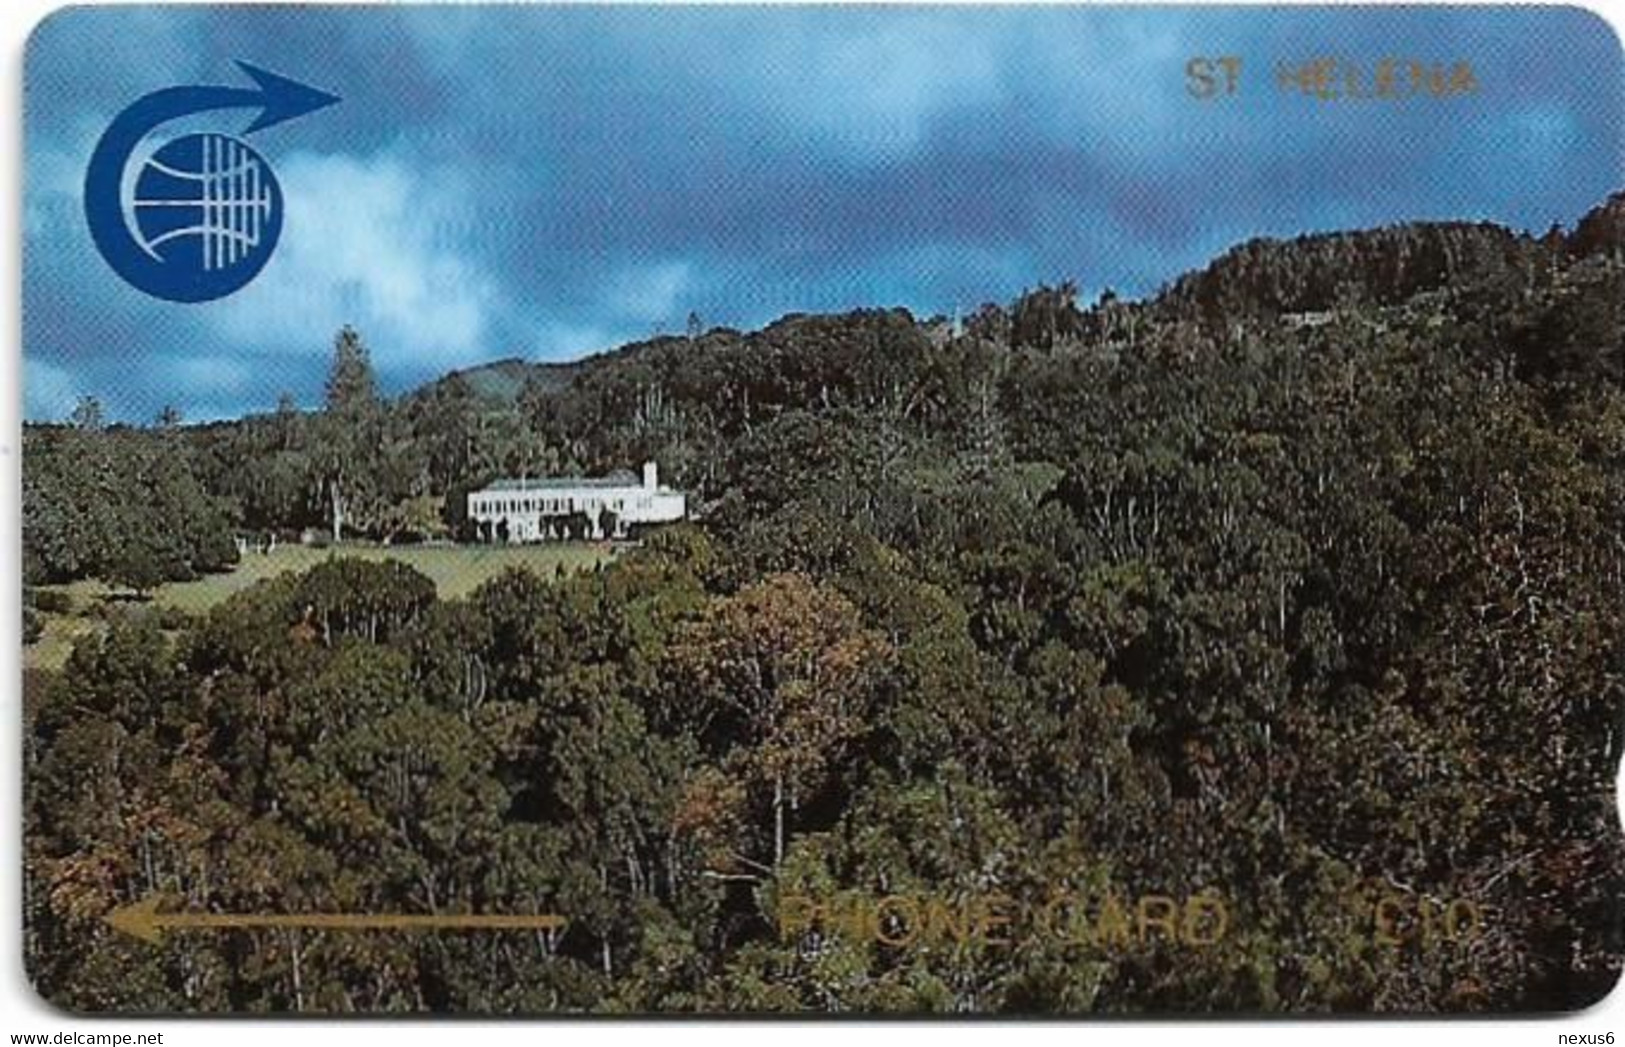 St. Helena - C&W - GPT - Views Of St. Helena #1 - Government House - 1CSHD - 10£, 3.600ex, Used - St. Helena